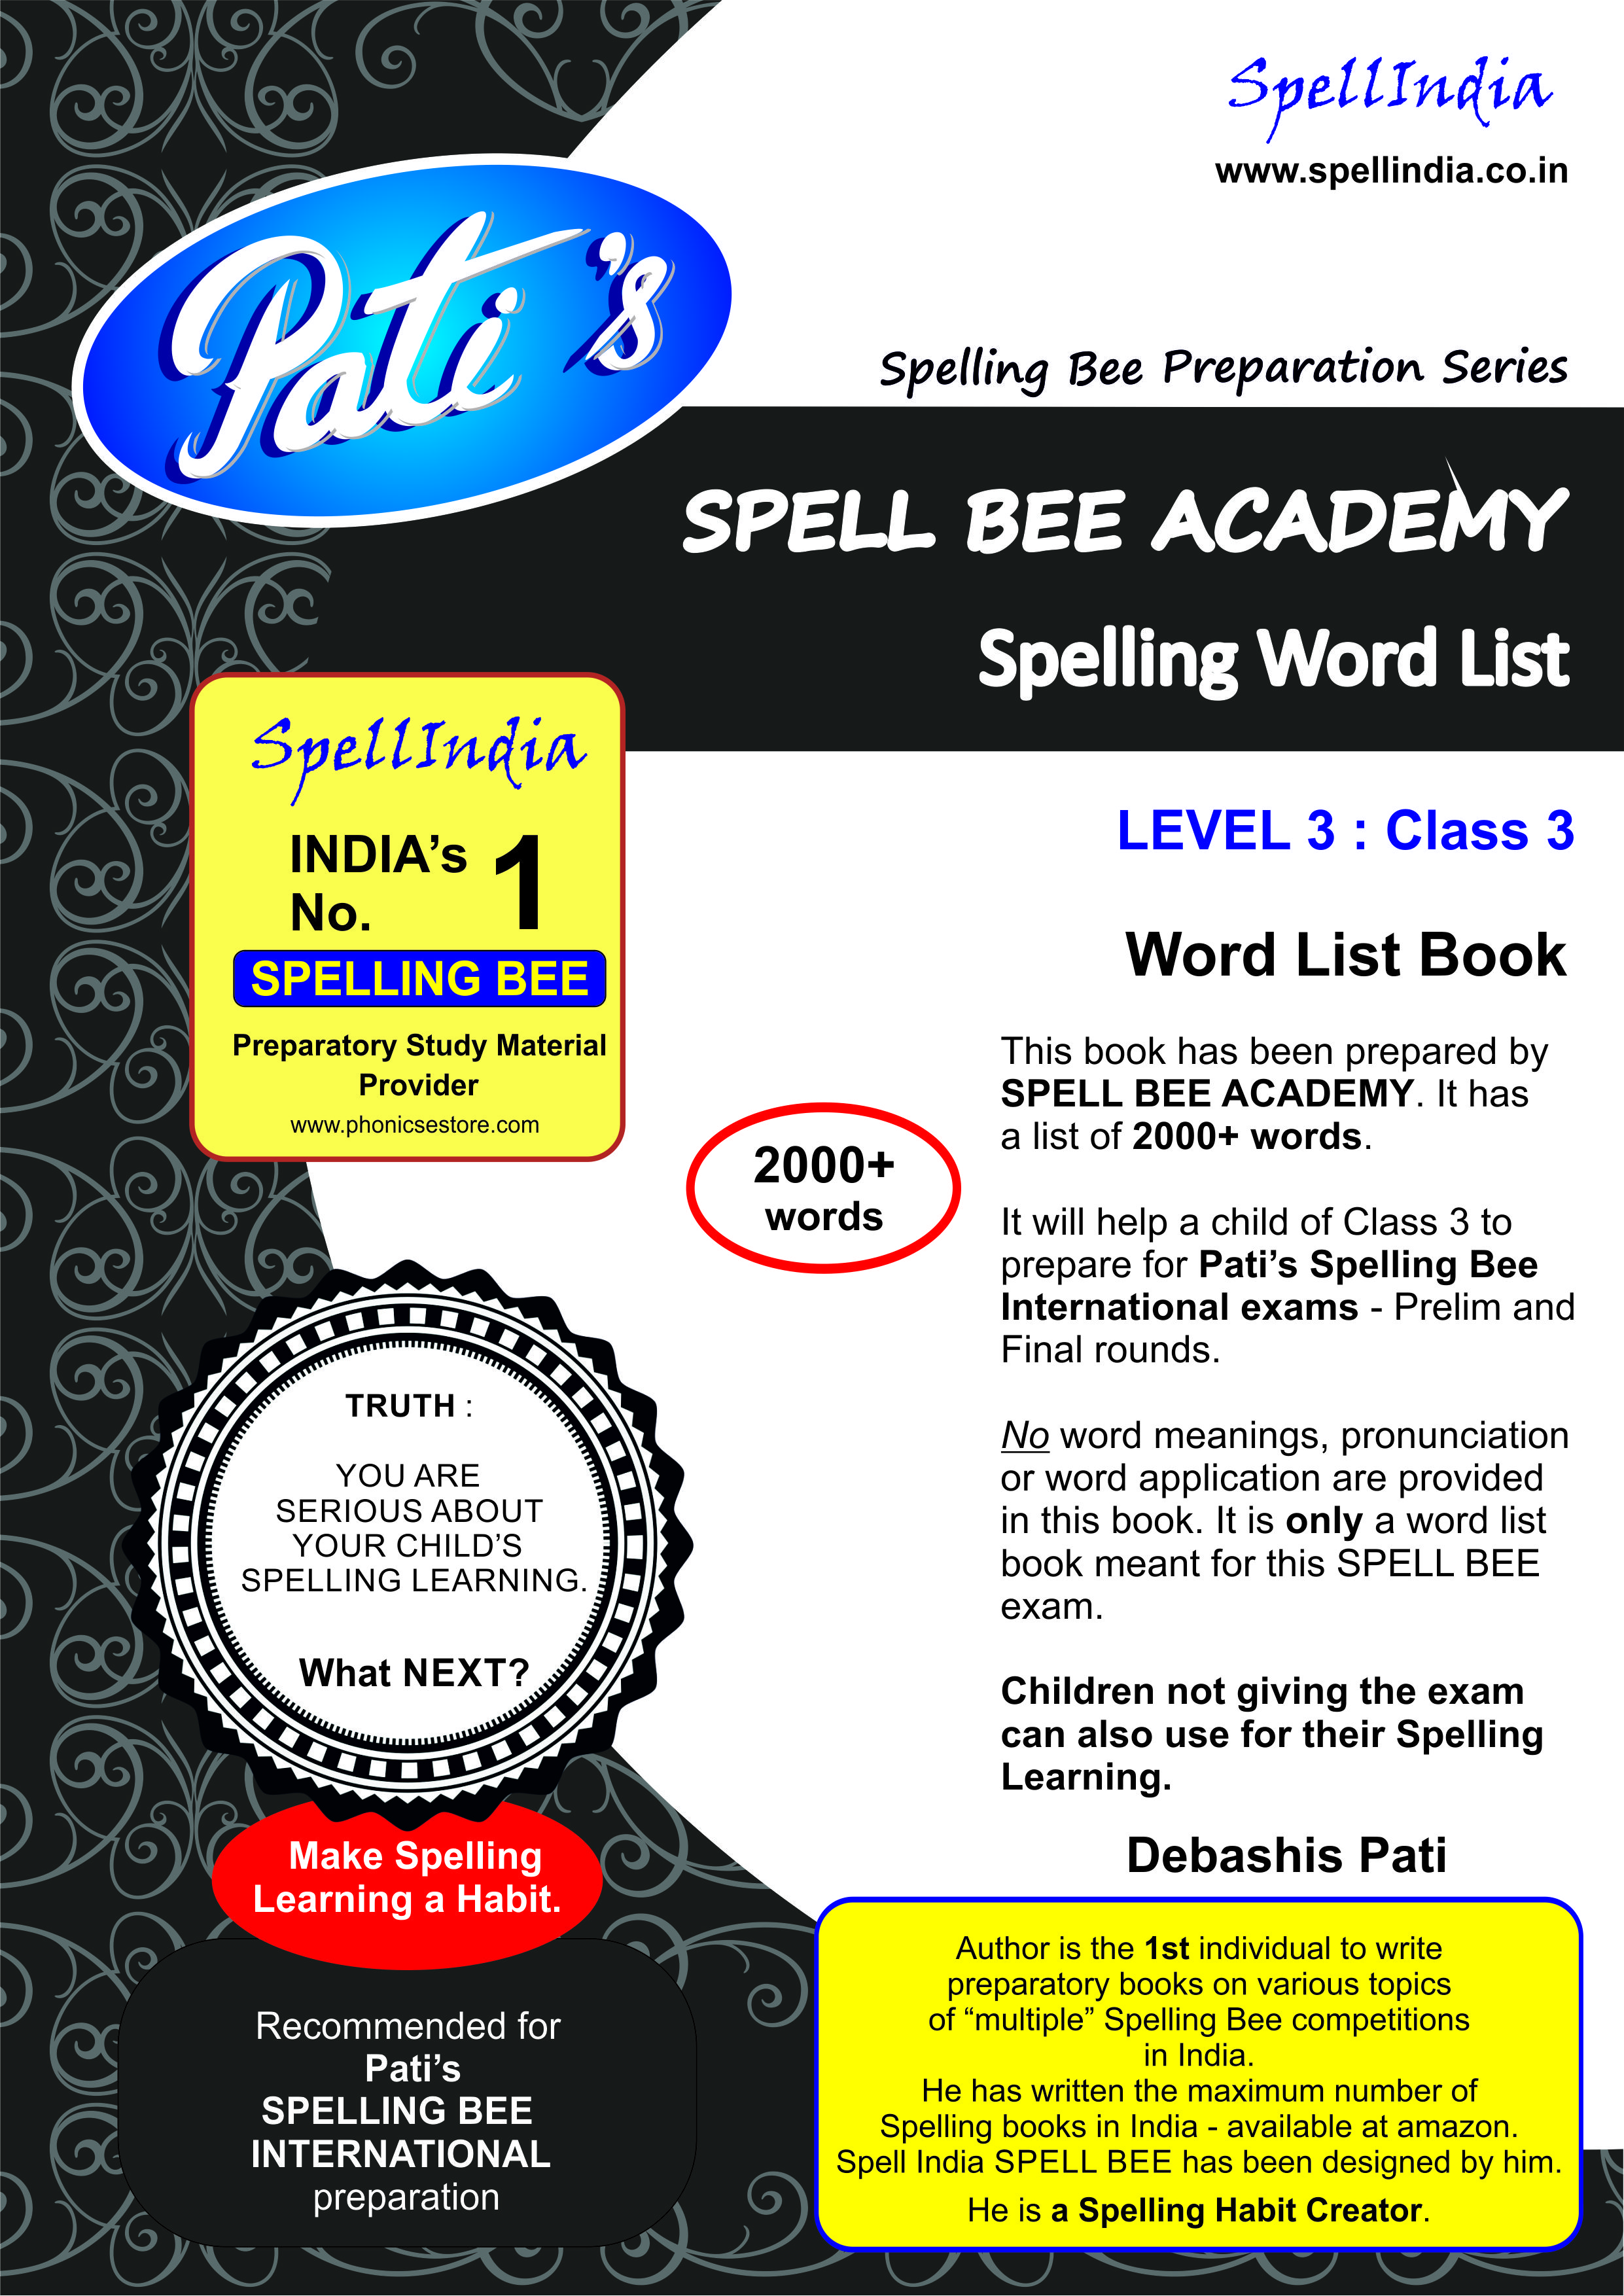 SPELLING WORD LIST FOR CLASS 3